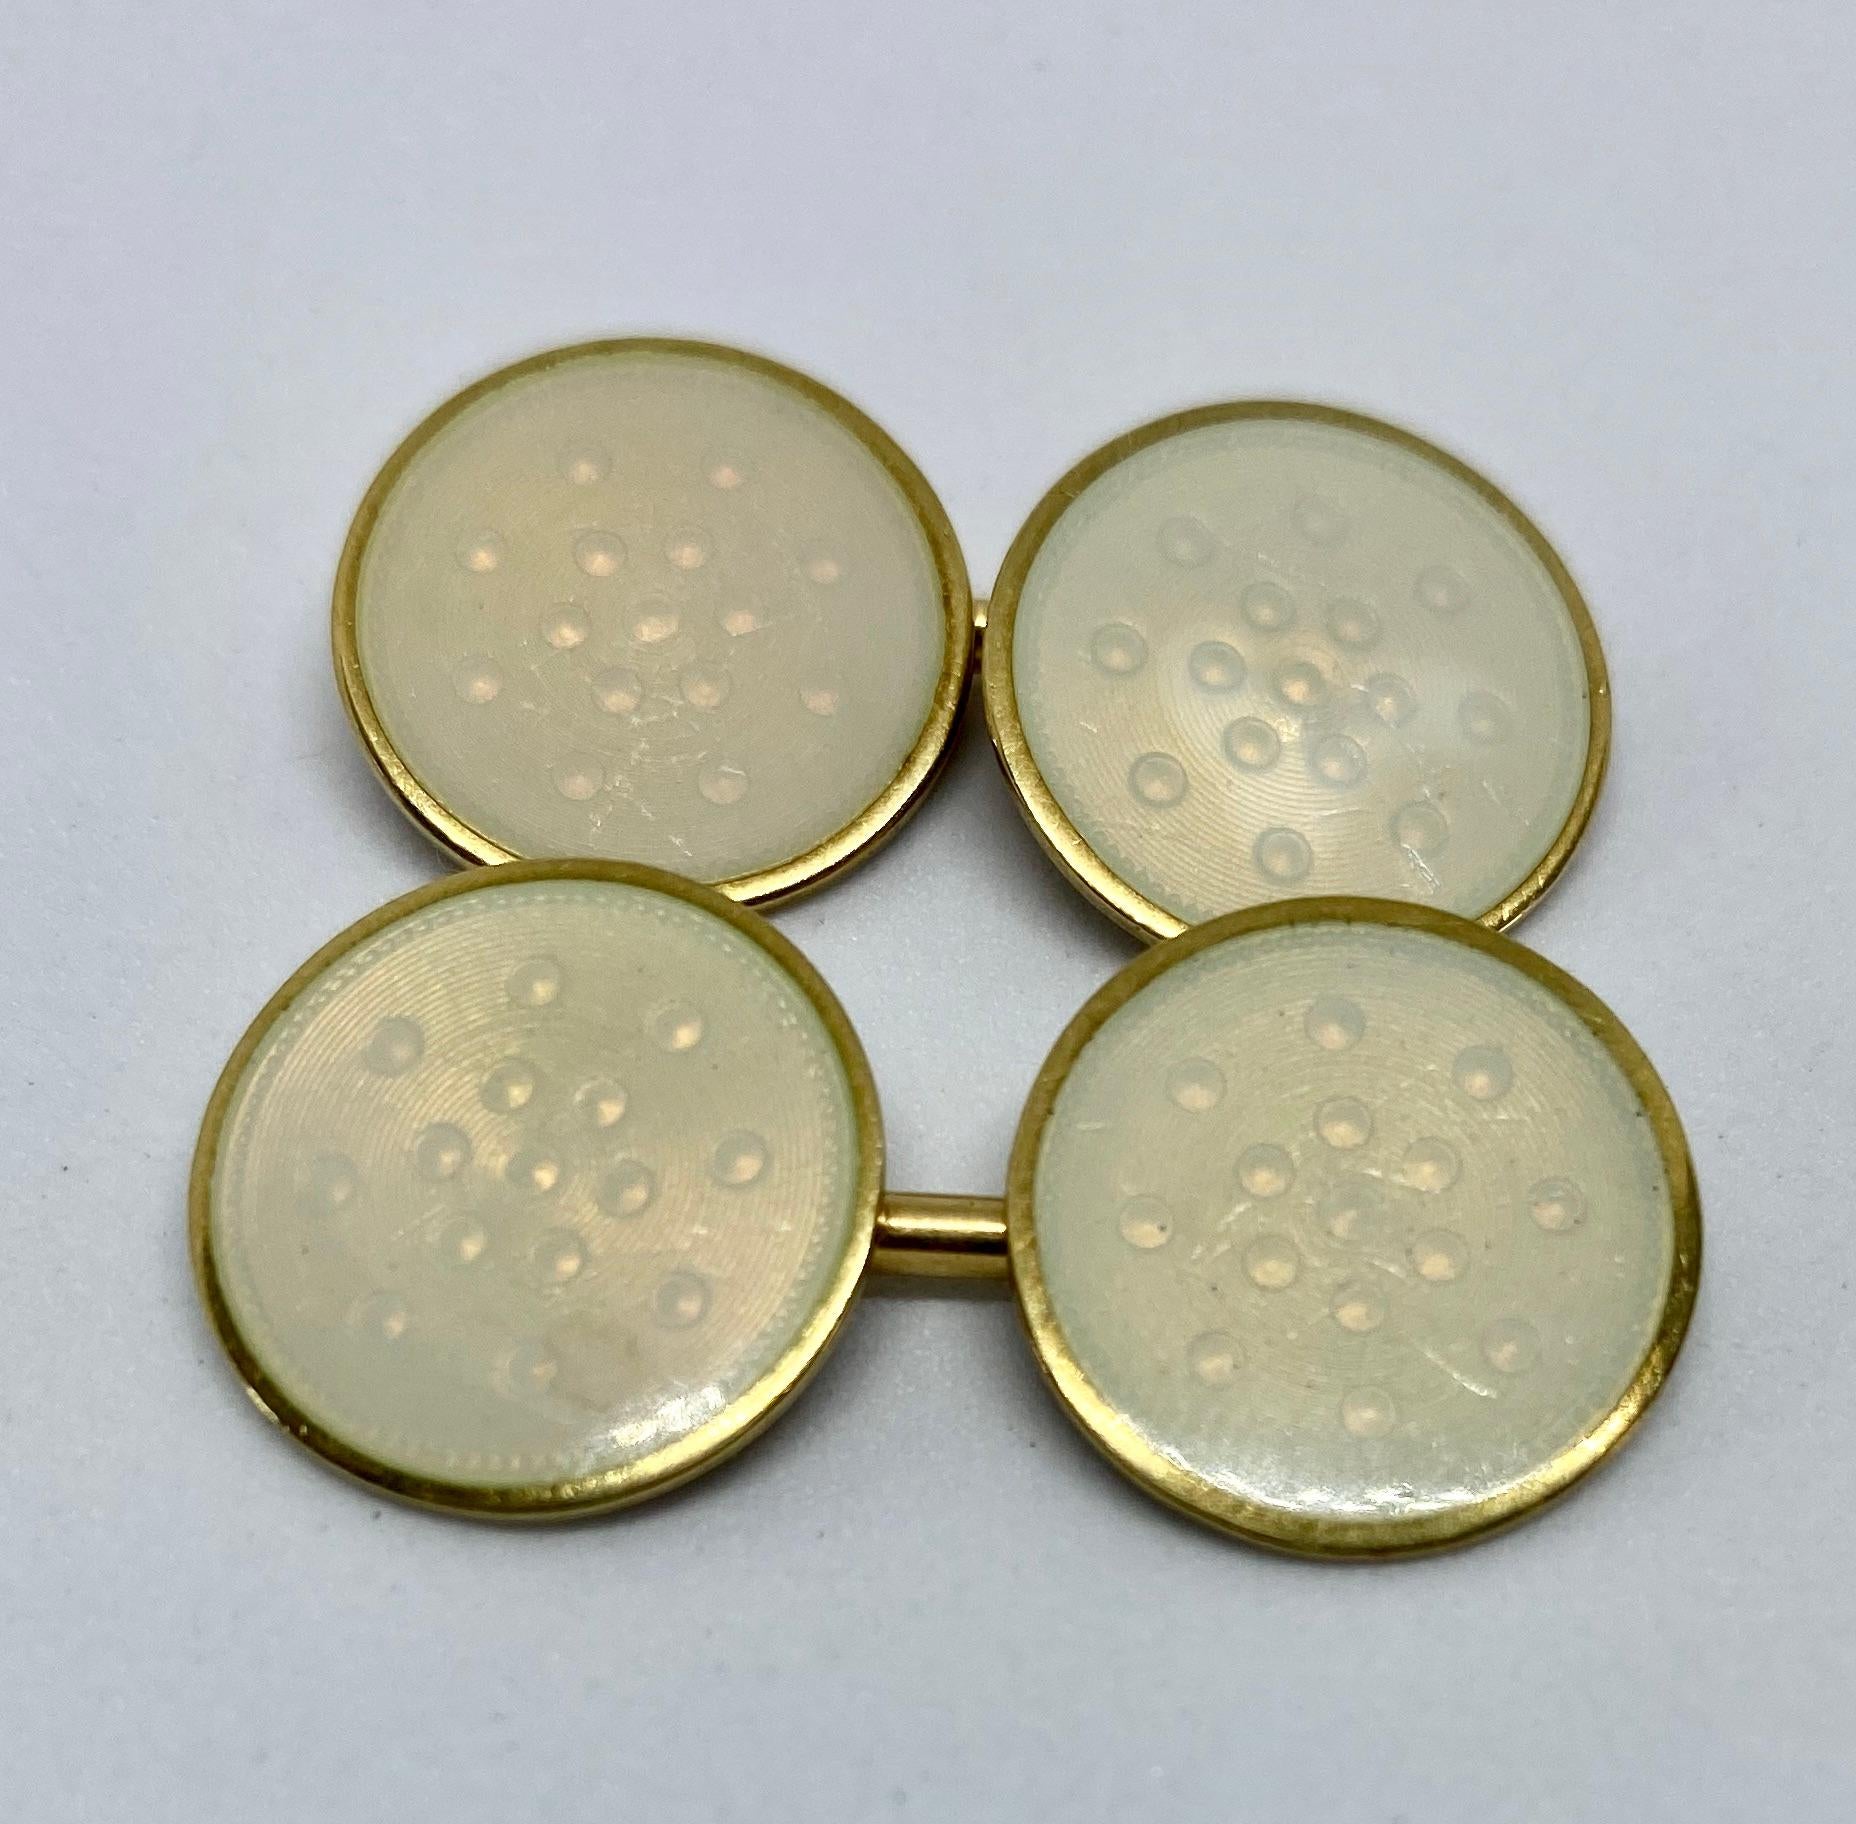 Art Deco Double-Sided Cufflinks with Yellow Gold and Creme-Colored Enamel For Sale